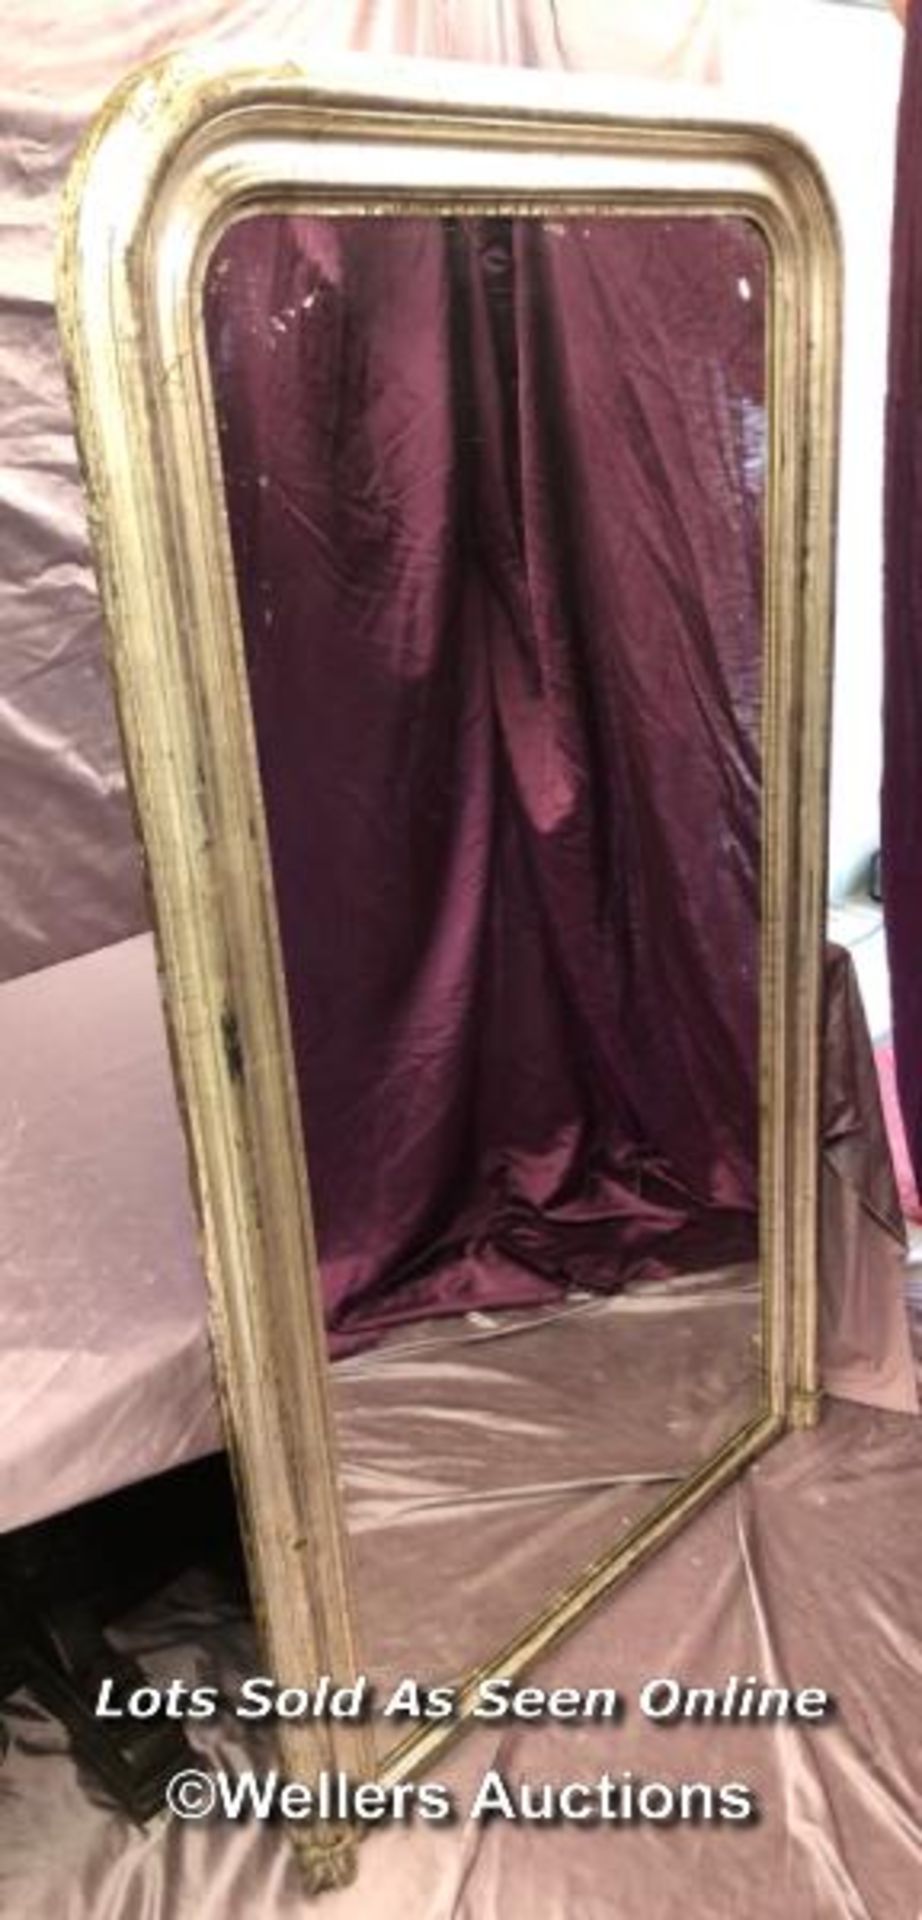 EARLY 19TH CENTURY FULL LENGTH FRENCH LOOKING GLASS WITH ORIGINAL SILVER GILDING, 105 X 185CM